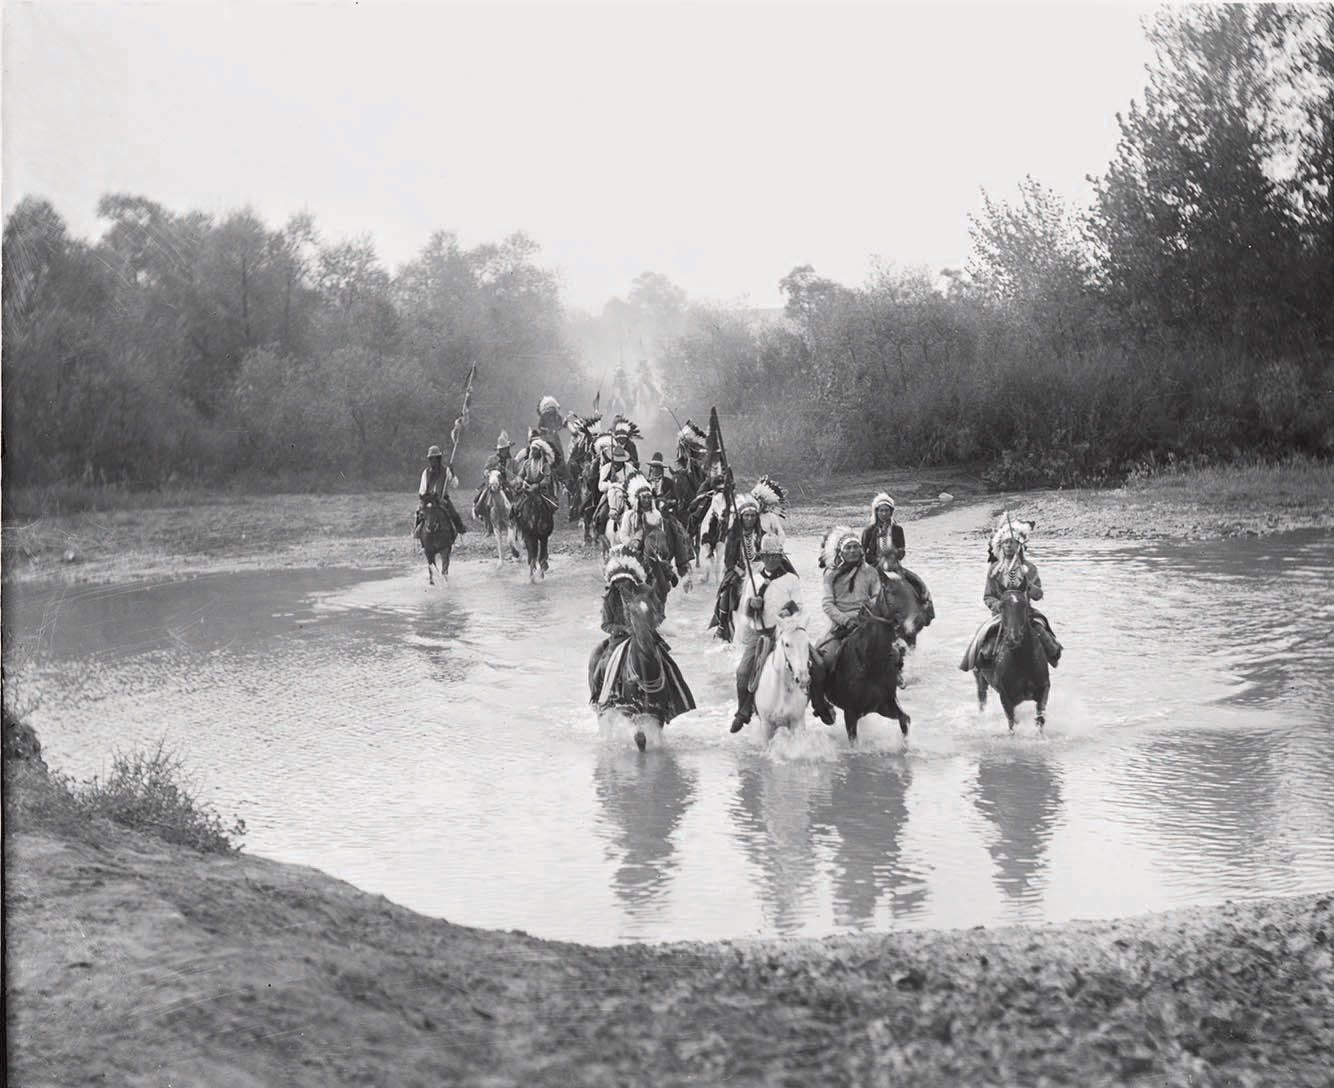 Warriors Crossing the River/Photography: Richard Throssel